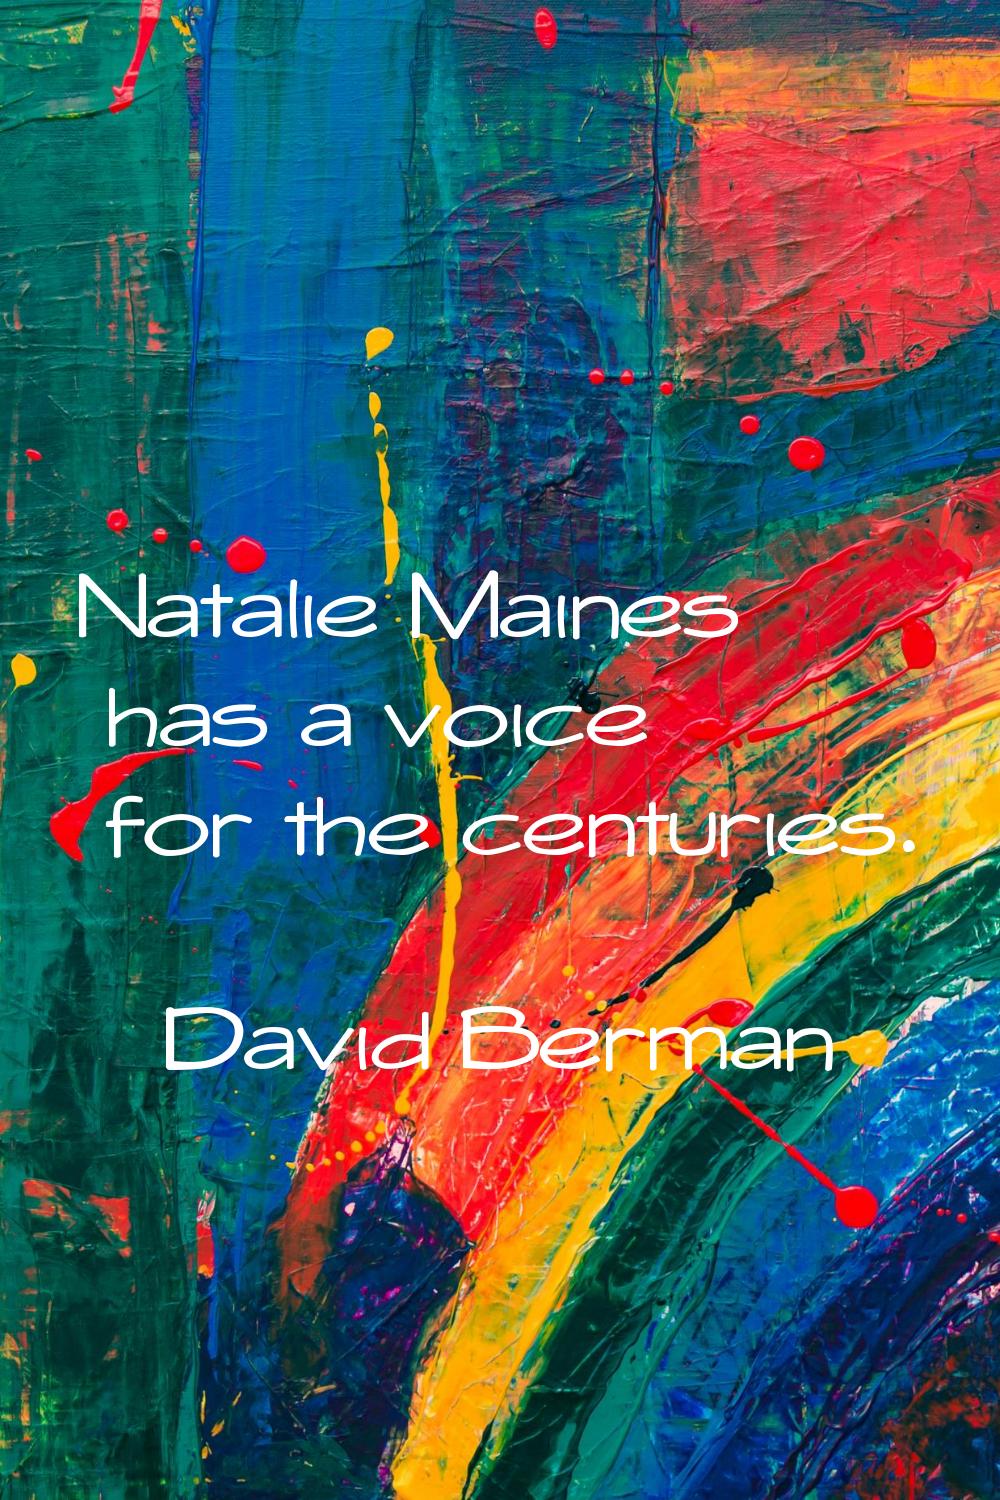 Natalie Maines has a voice for the centuries.